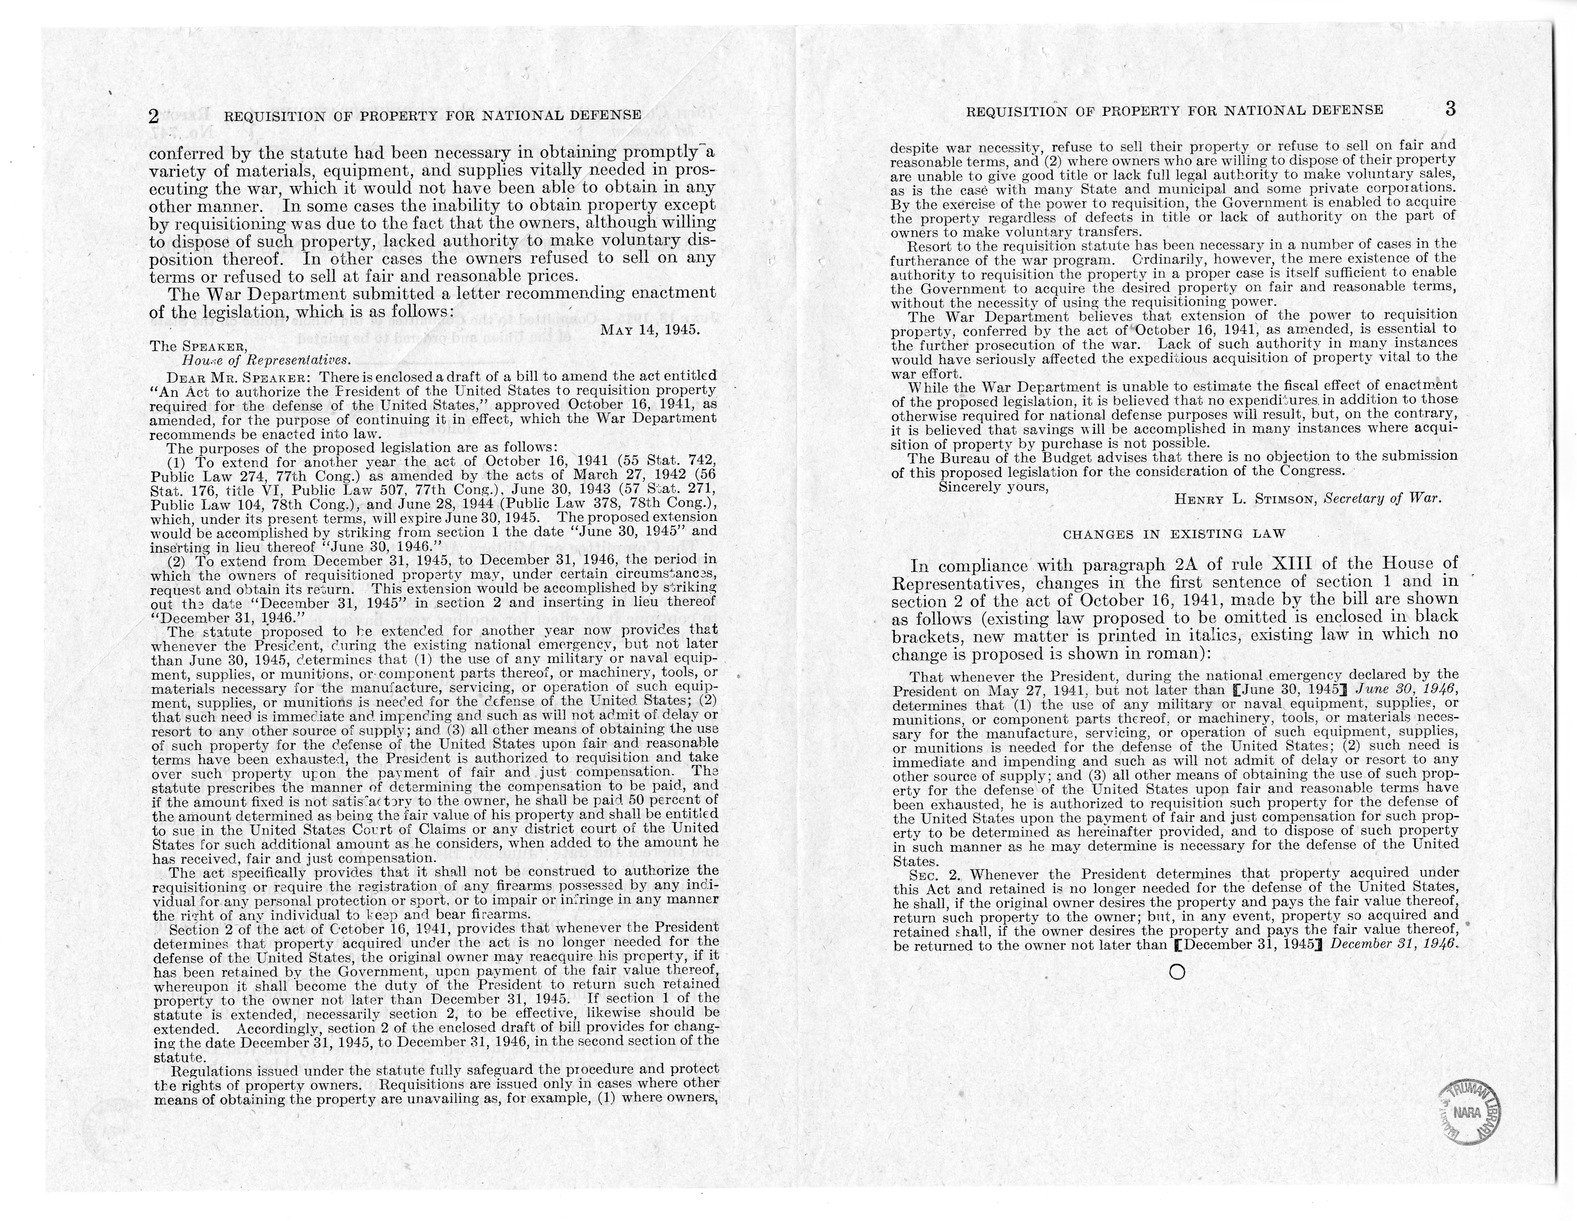 Memorandum from Harold D. Smith to M. C. Latta, H.R. 3234, To Amend An Act to Authorize the President of the United States to Requisition Property Required for the Defense of the United States', Approved October 16, 1941, as Amended, for the Purpose of Co